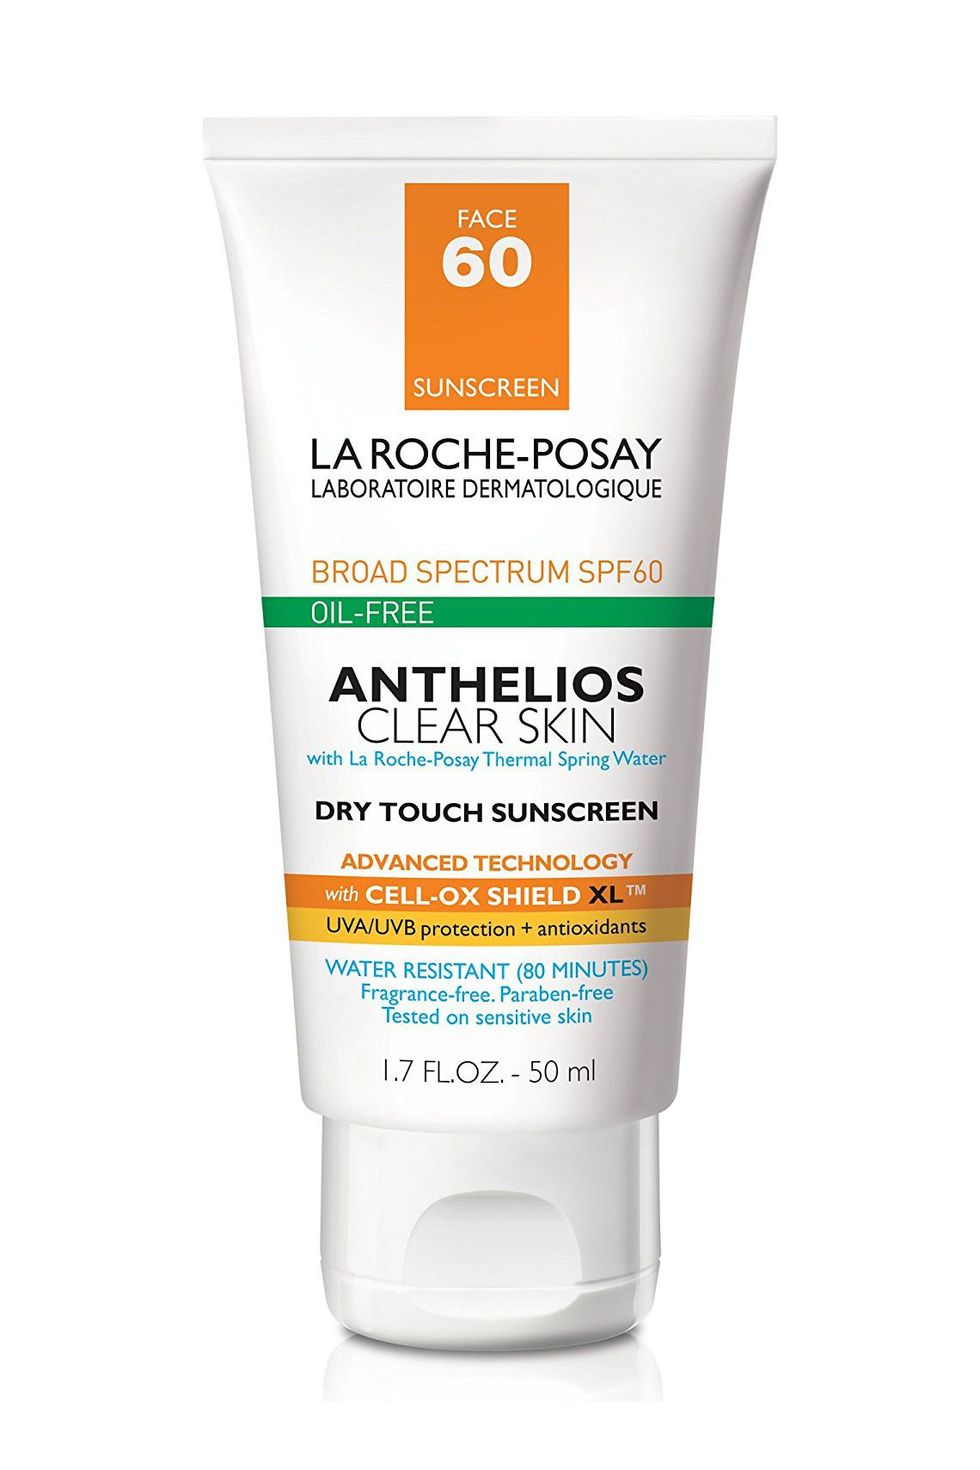 For Acne-Prone Skin: La Roche-Posay Anthelios 60 Clear Skin Dry Sunscreen